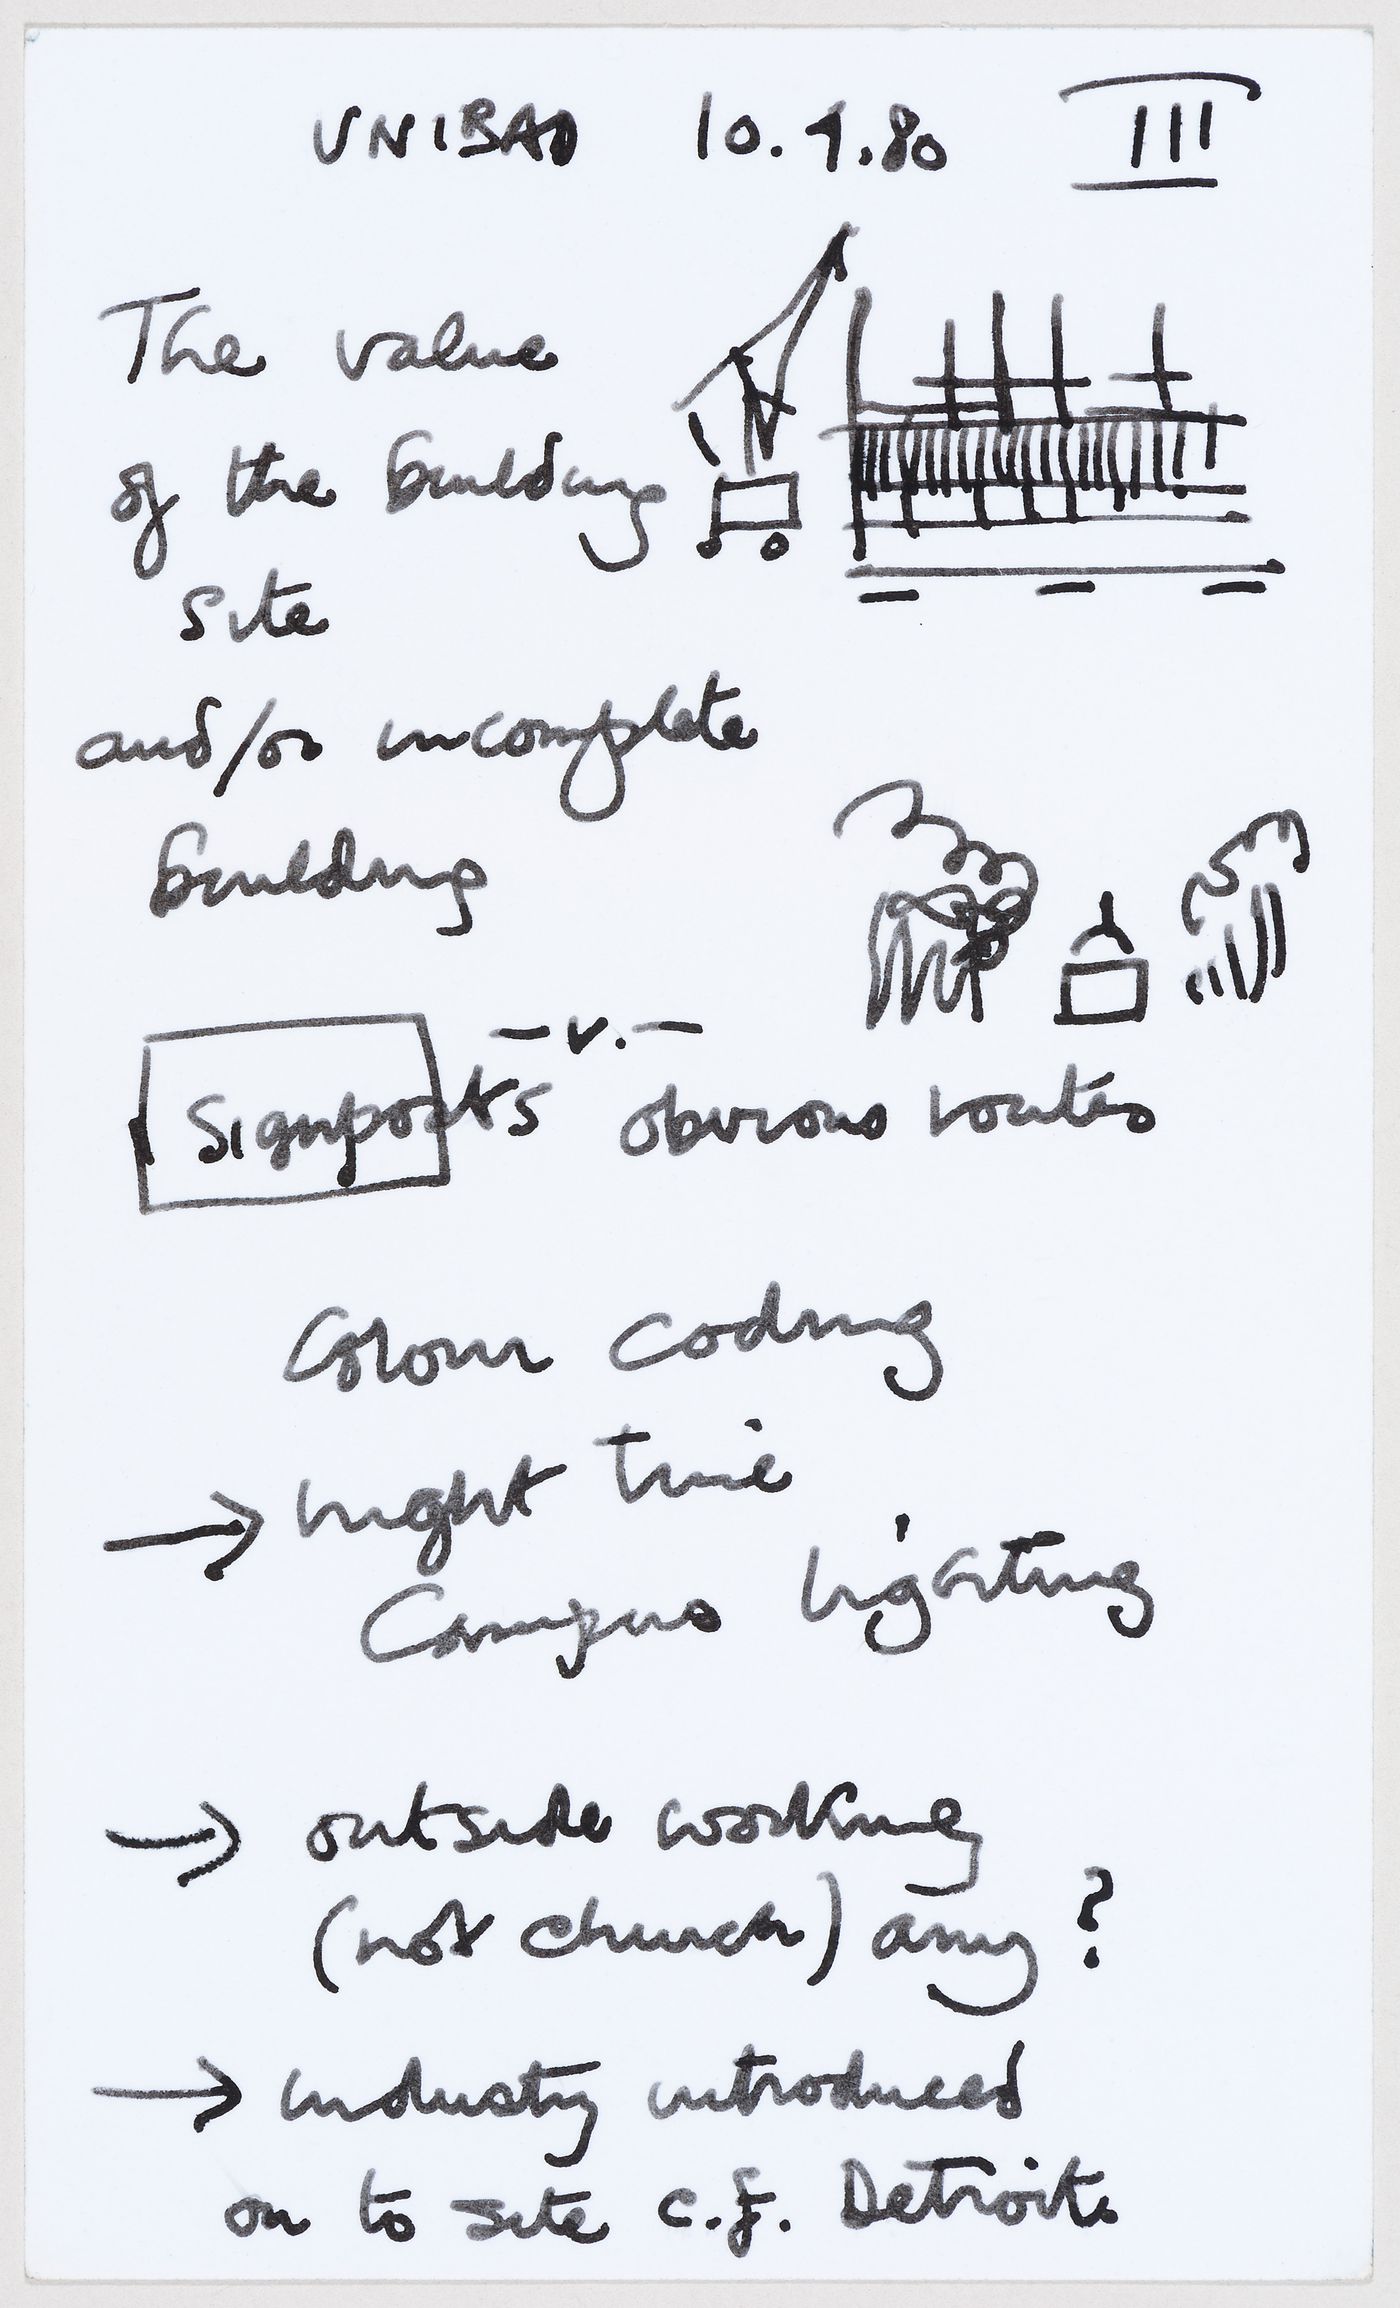 Unibad: notes and sketches